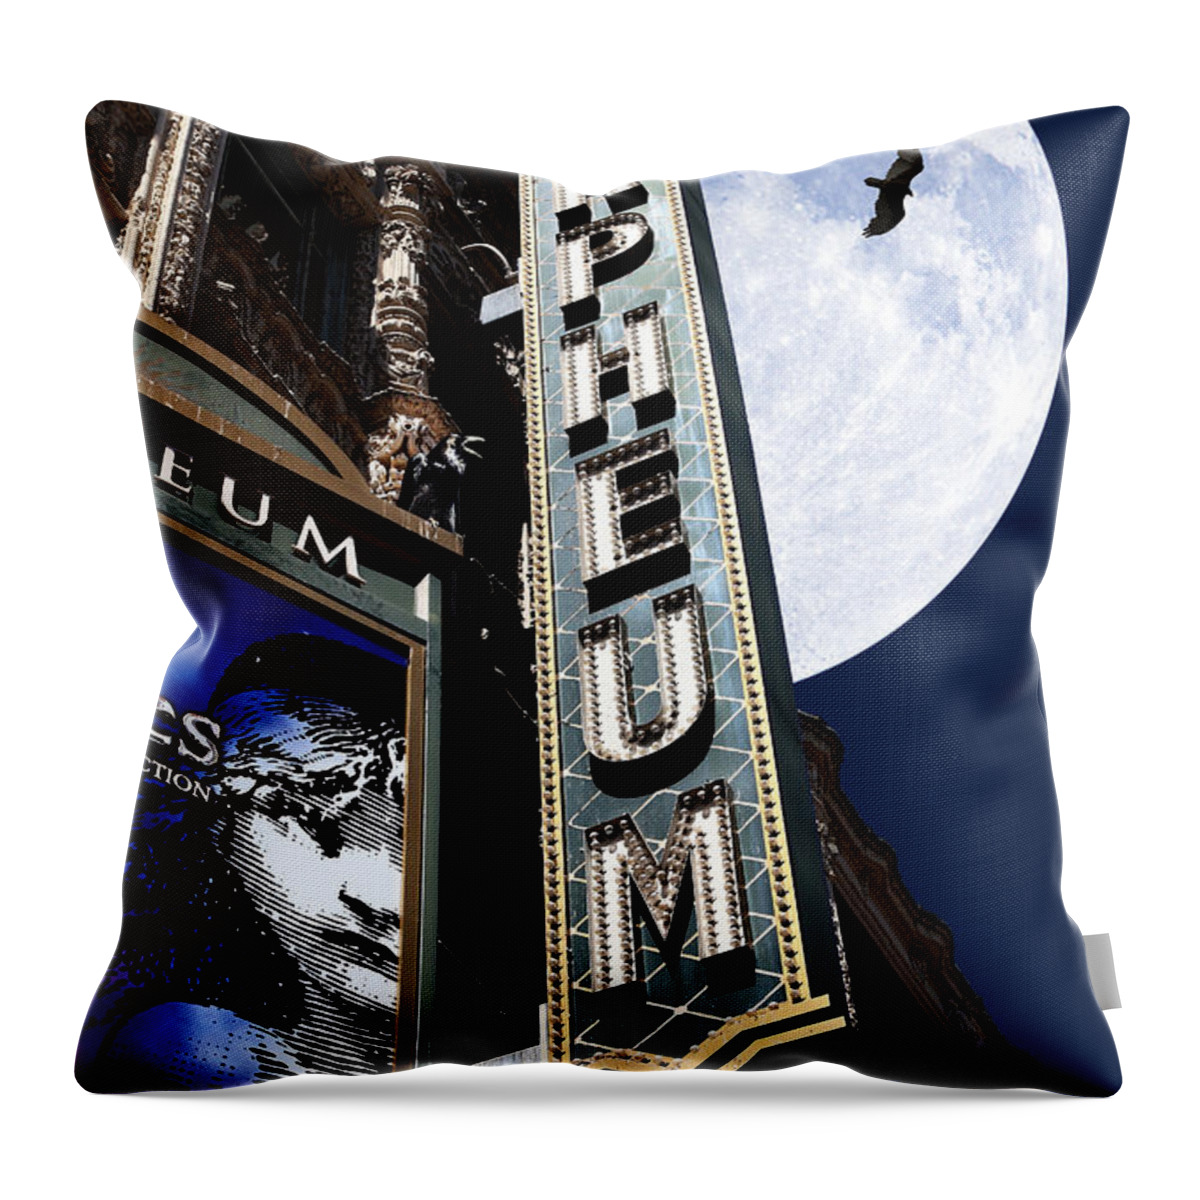 San Francisco Throw Pillow featuring the photograph Midnight at The Orpheum - San Francisco California - 5D17991 by Wingsdomain Art and Photography